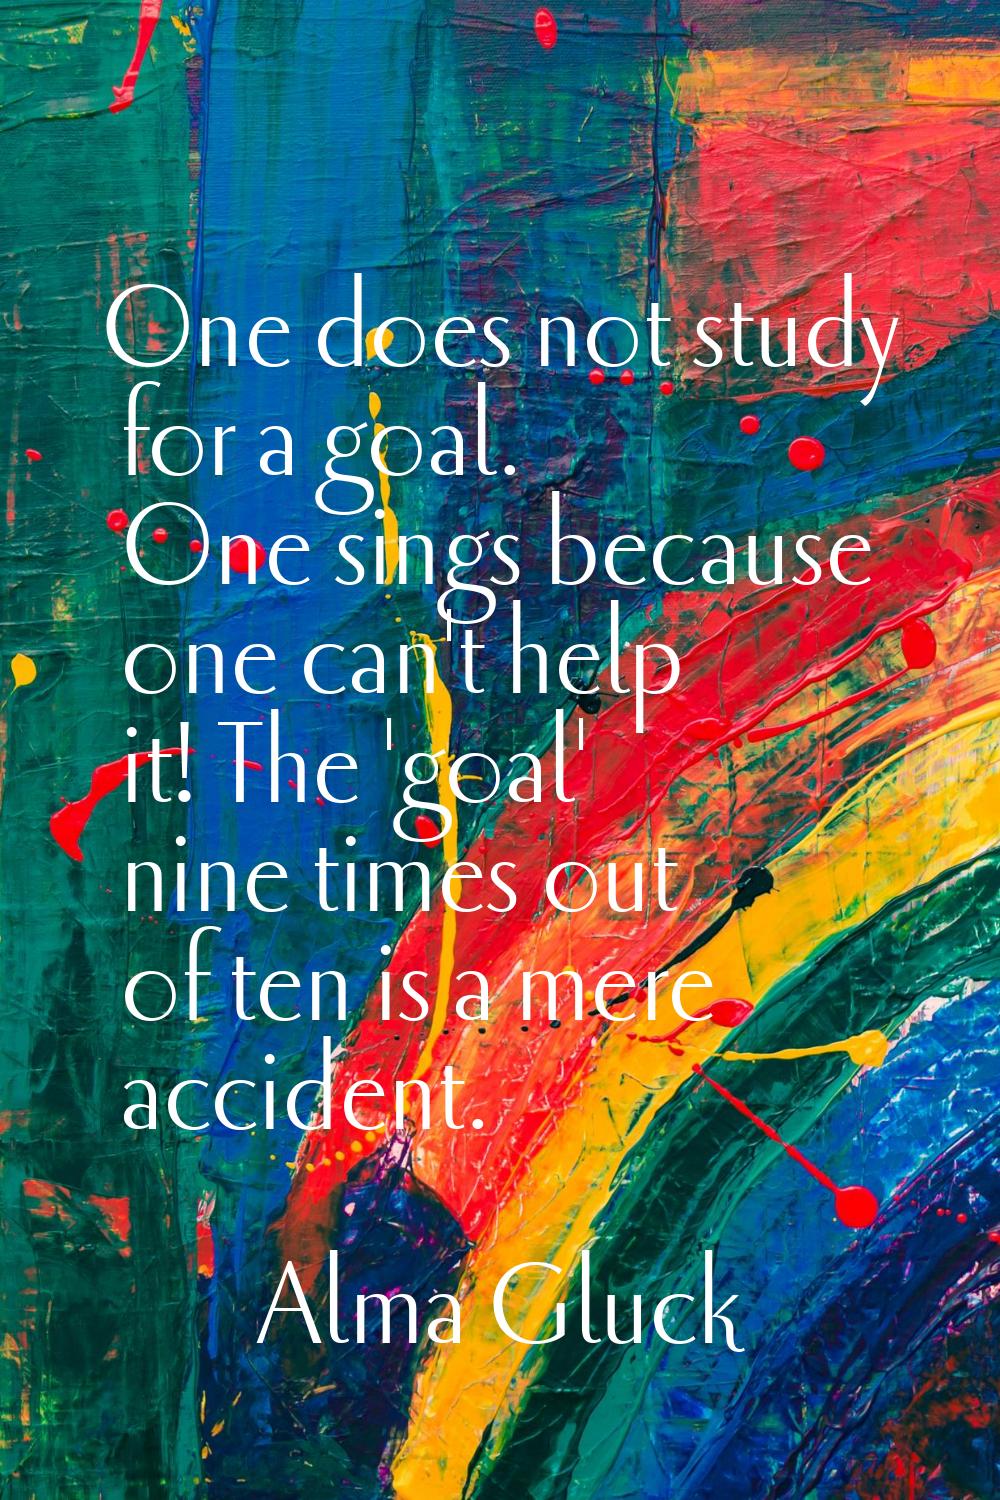 One does not study for a goal. One sings because one can't help it! The 'goal' nine times out of te